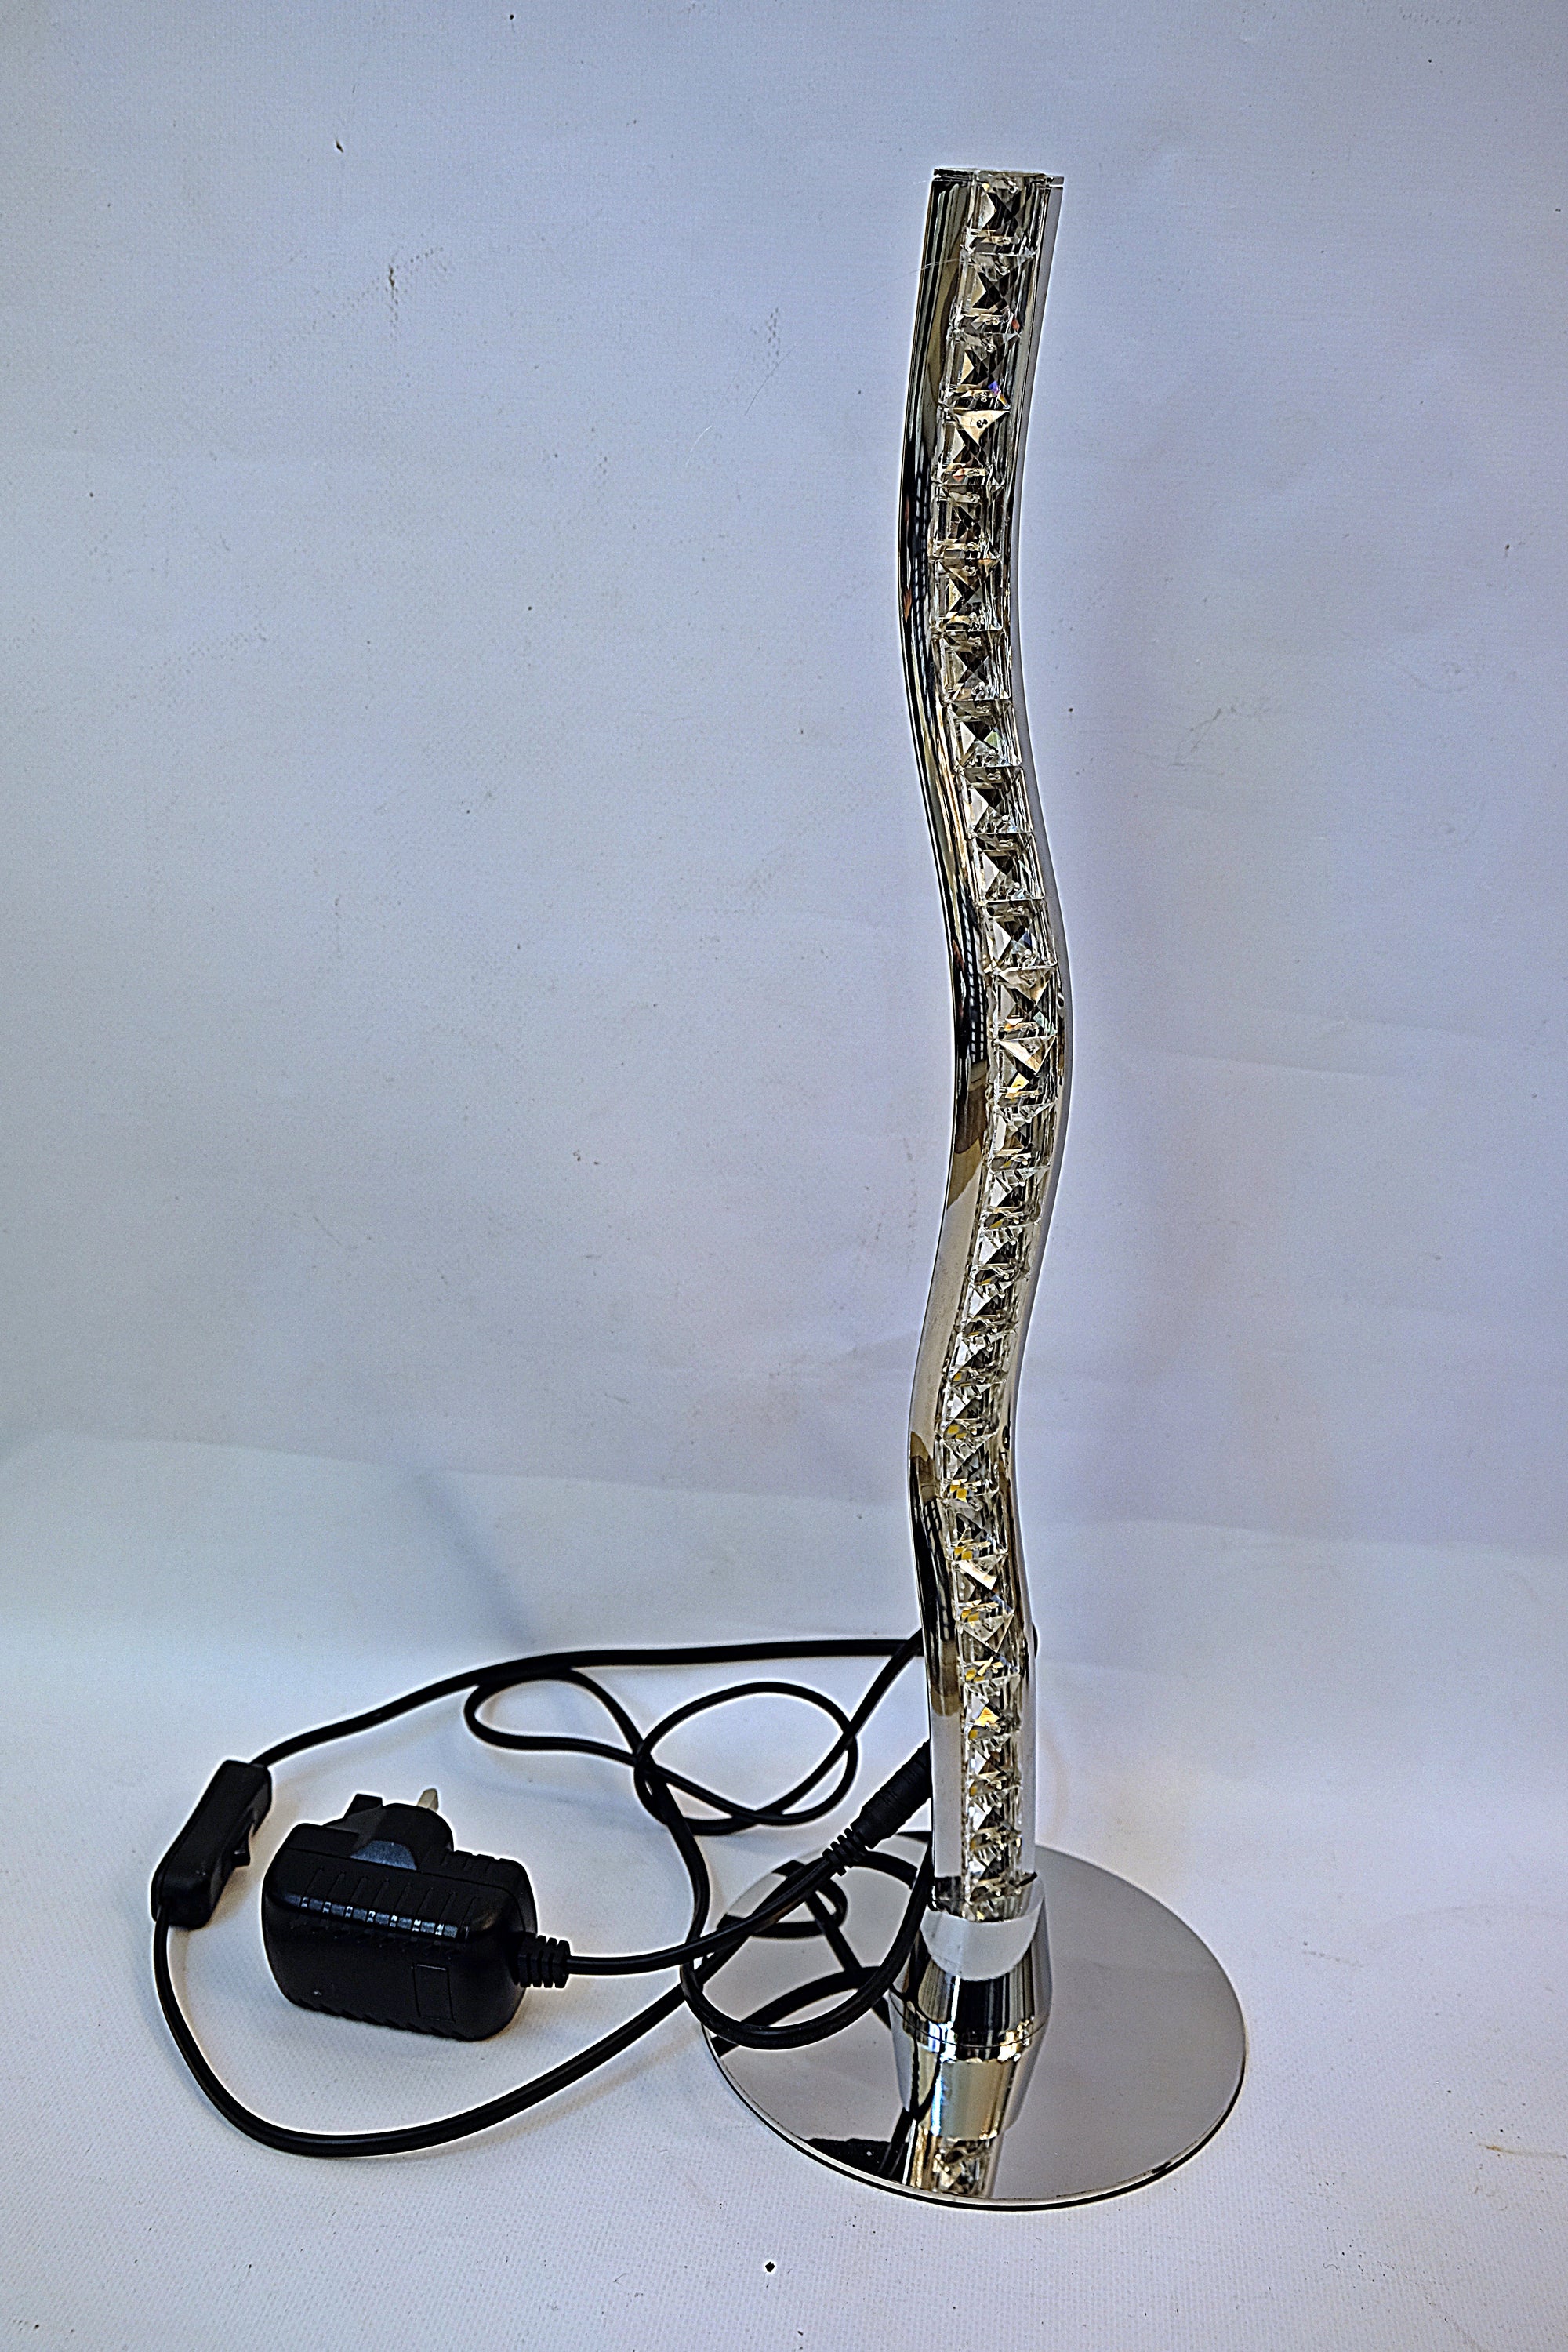 Waved table lamp with metallic frame and crystallic fixtures [MT53028-1A]